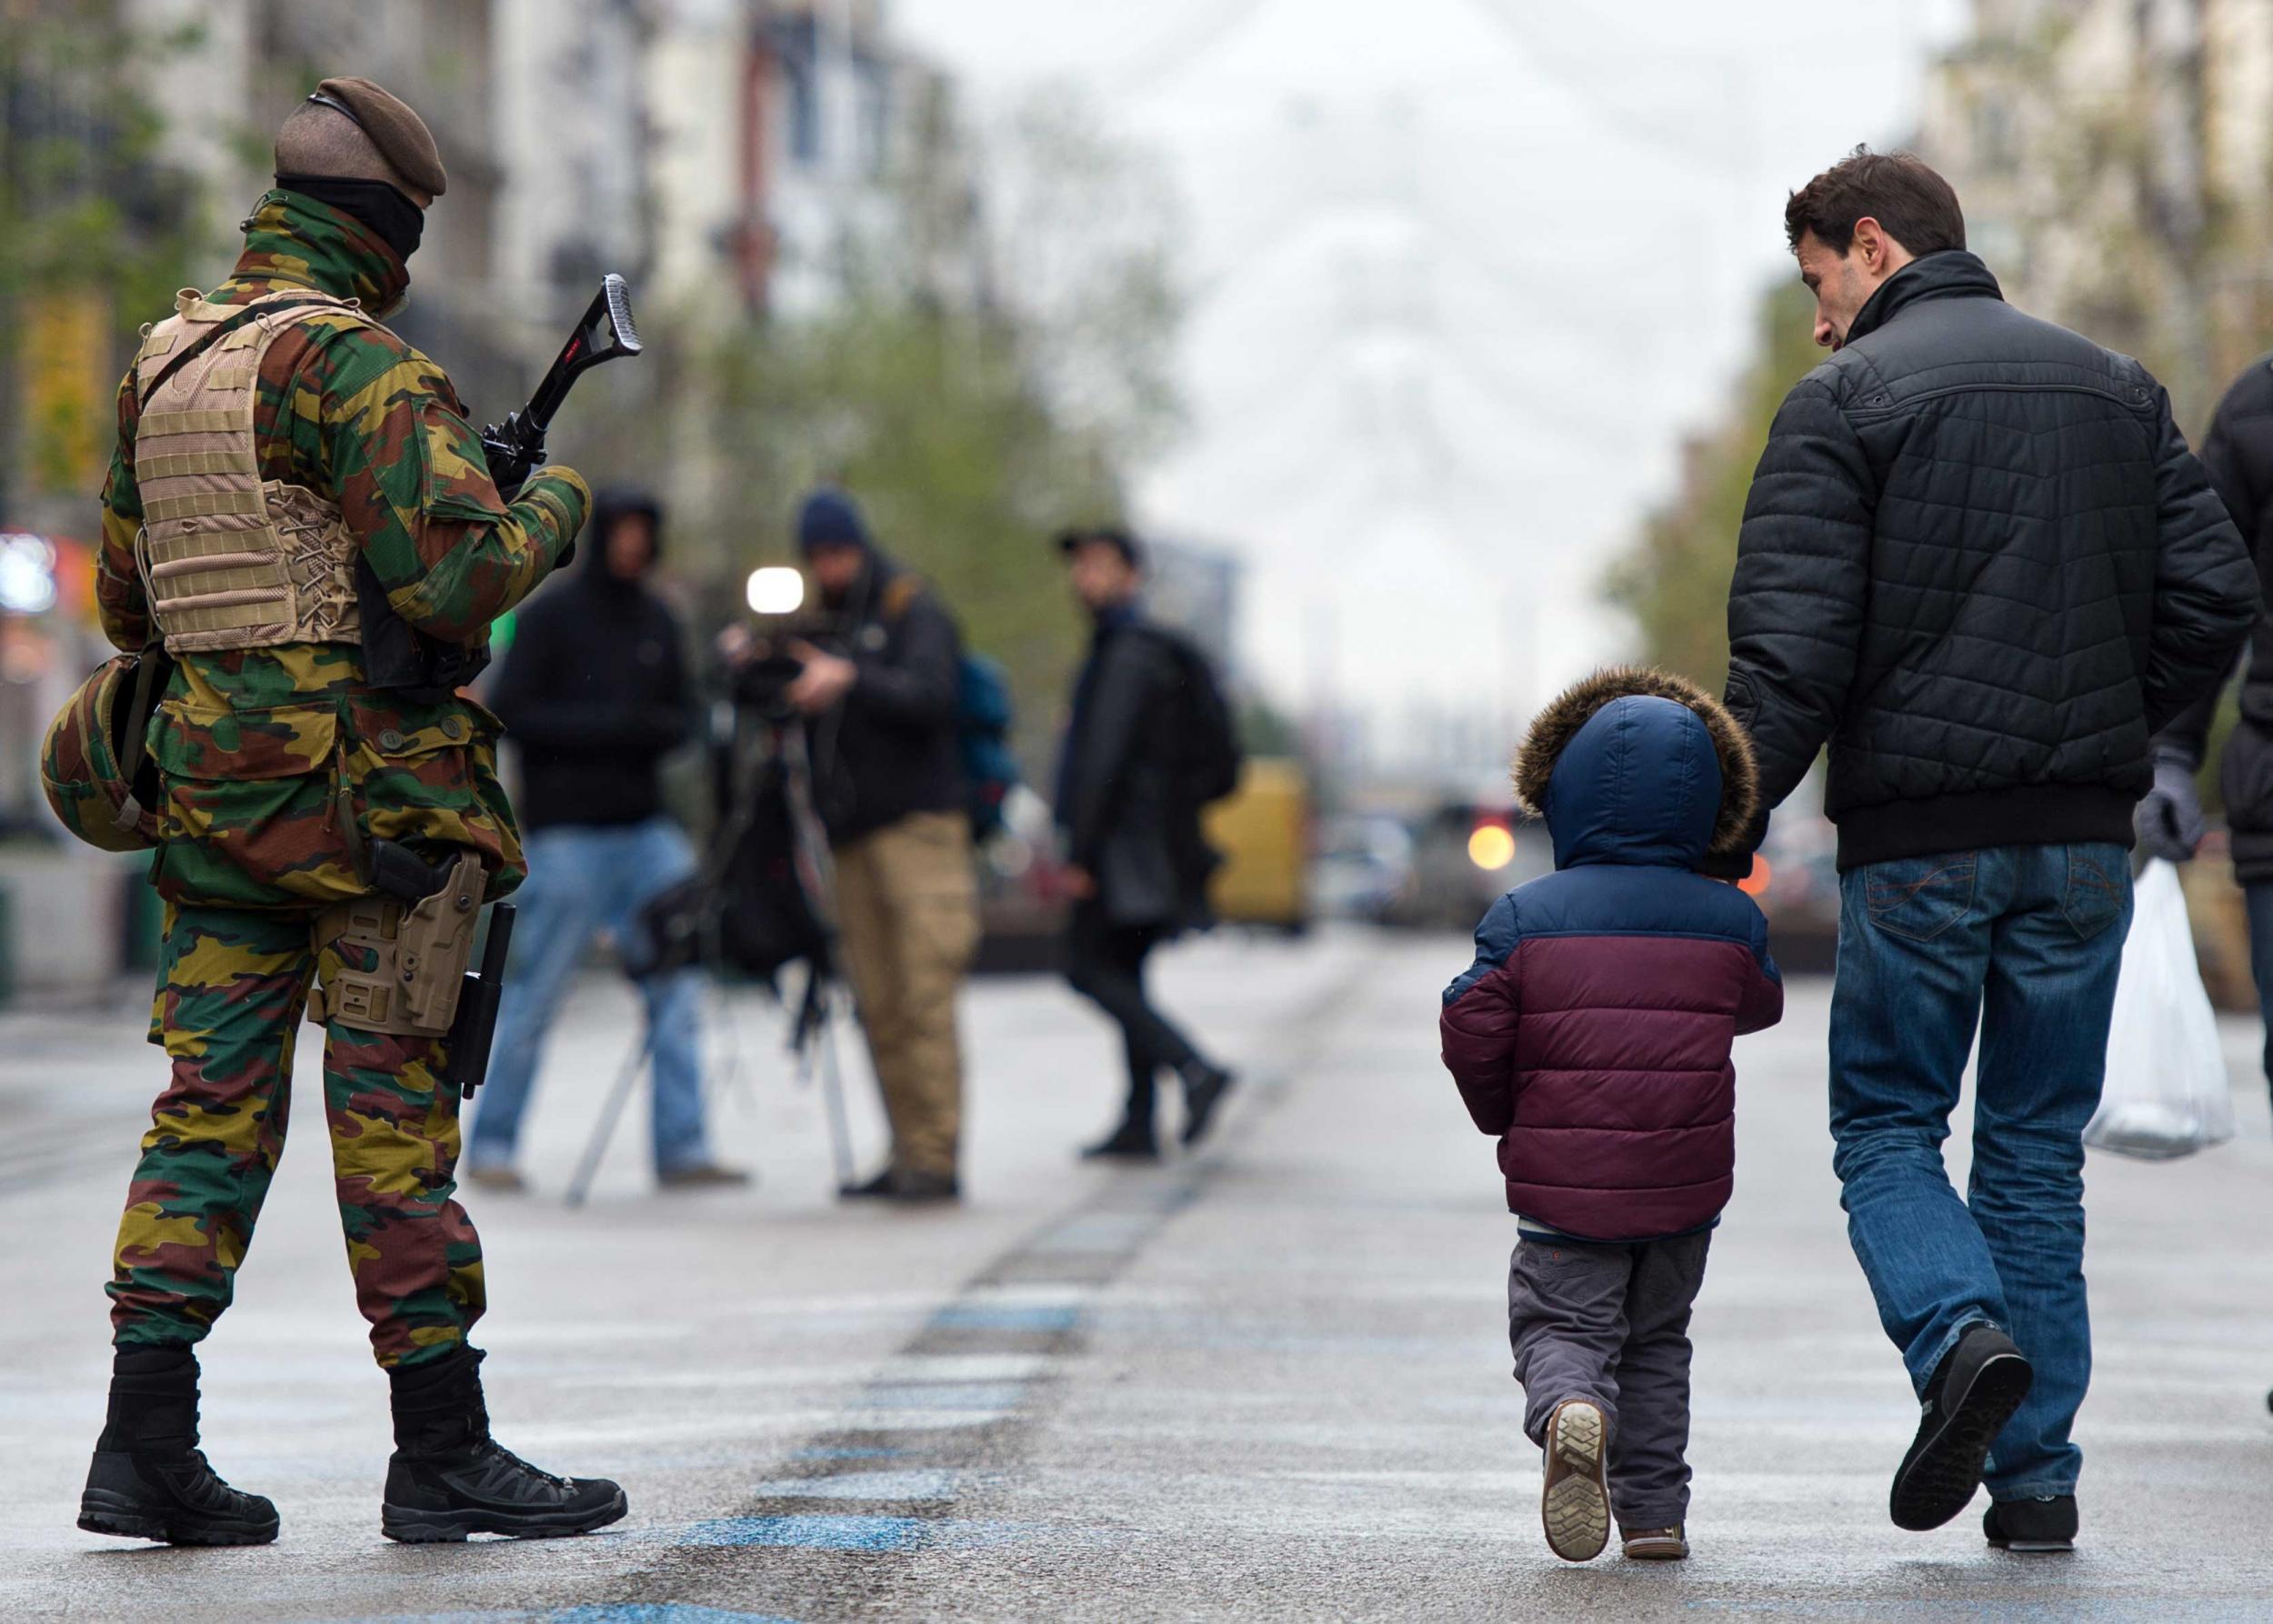 Brussels has been under a security lockdown amid a manhunt for one of the suspected Paris attackers